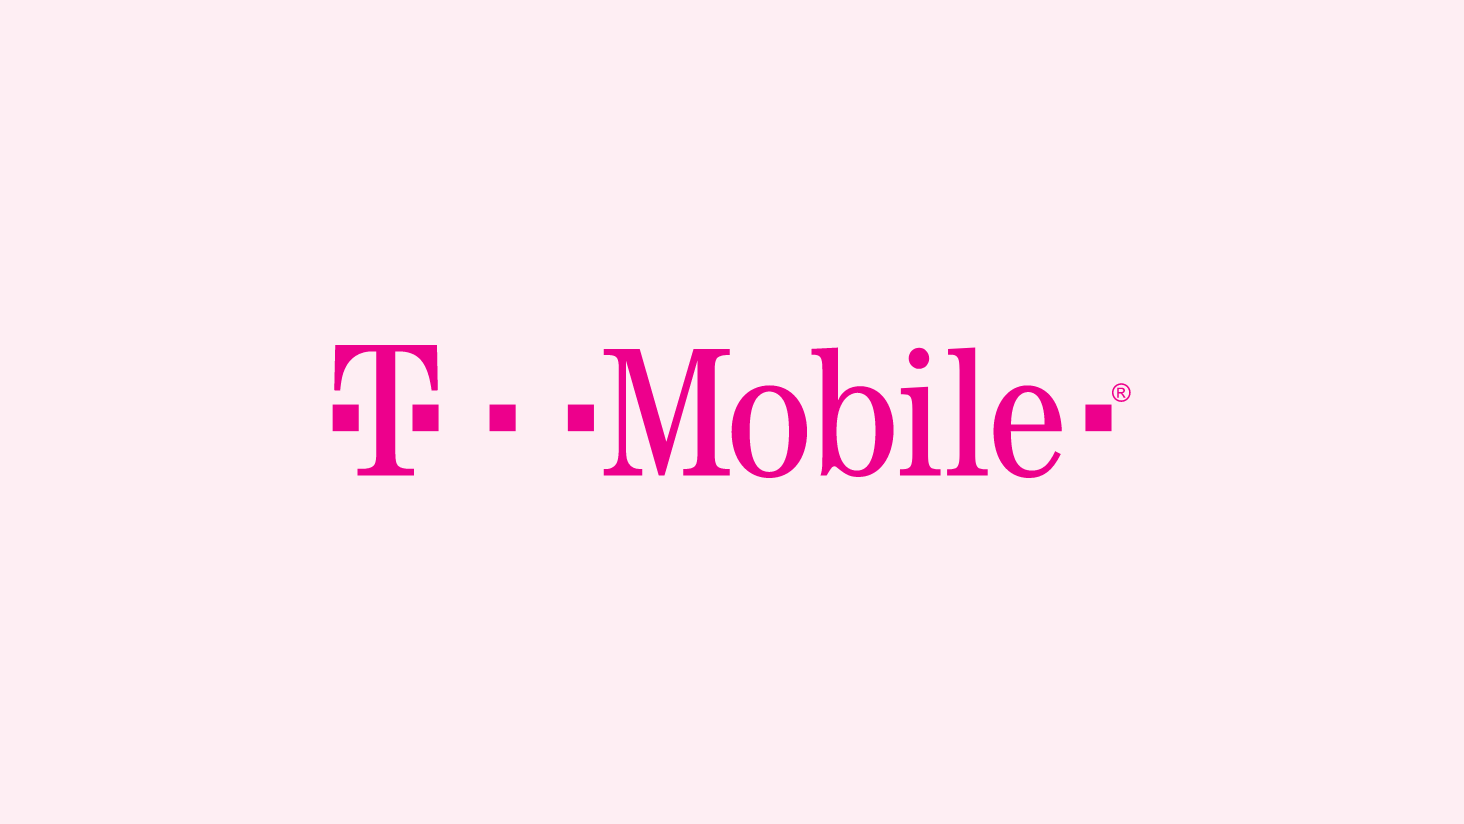 T-Mobile Thrives Thanks to Data-at-Scale Initiative